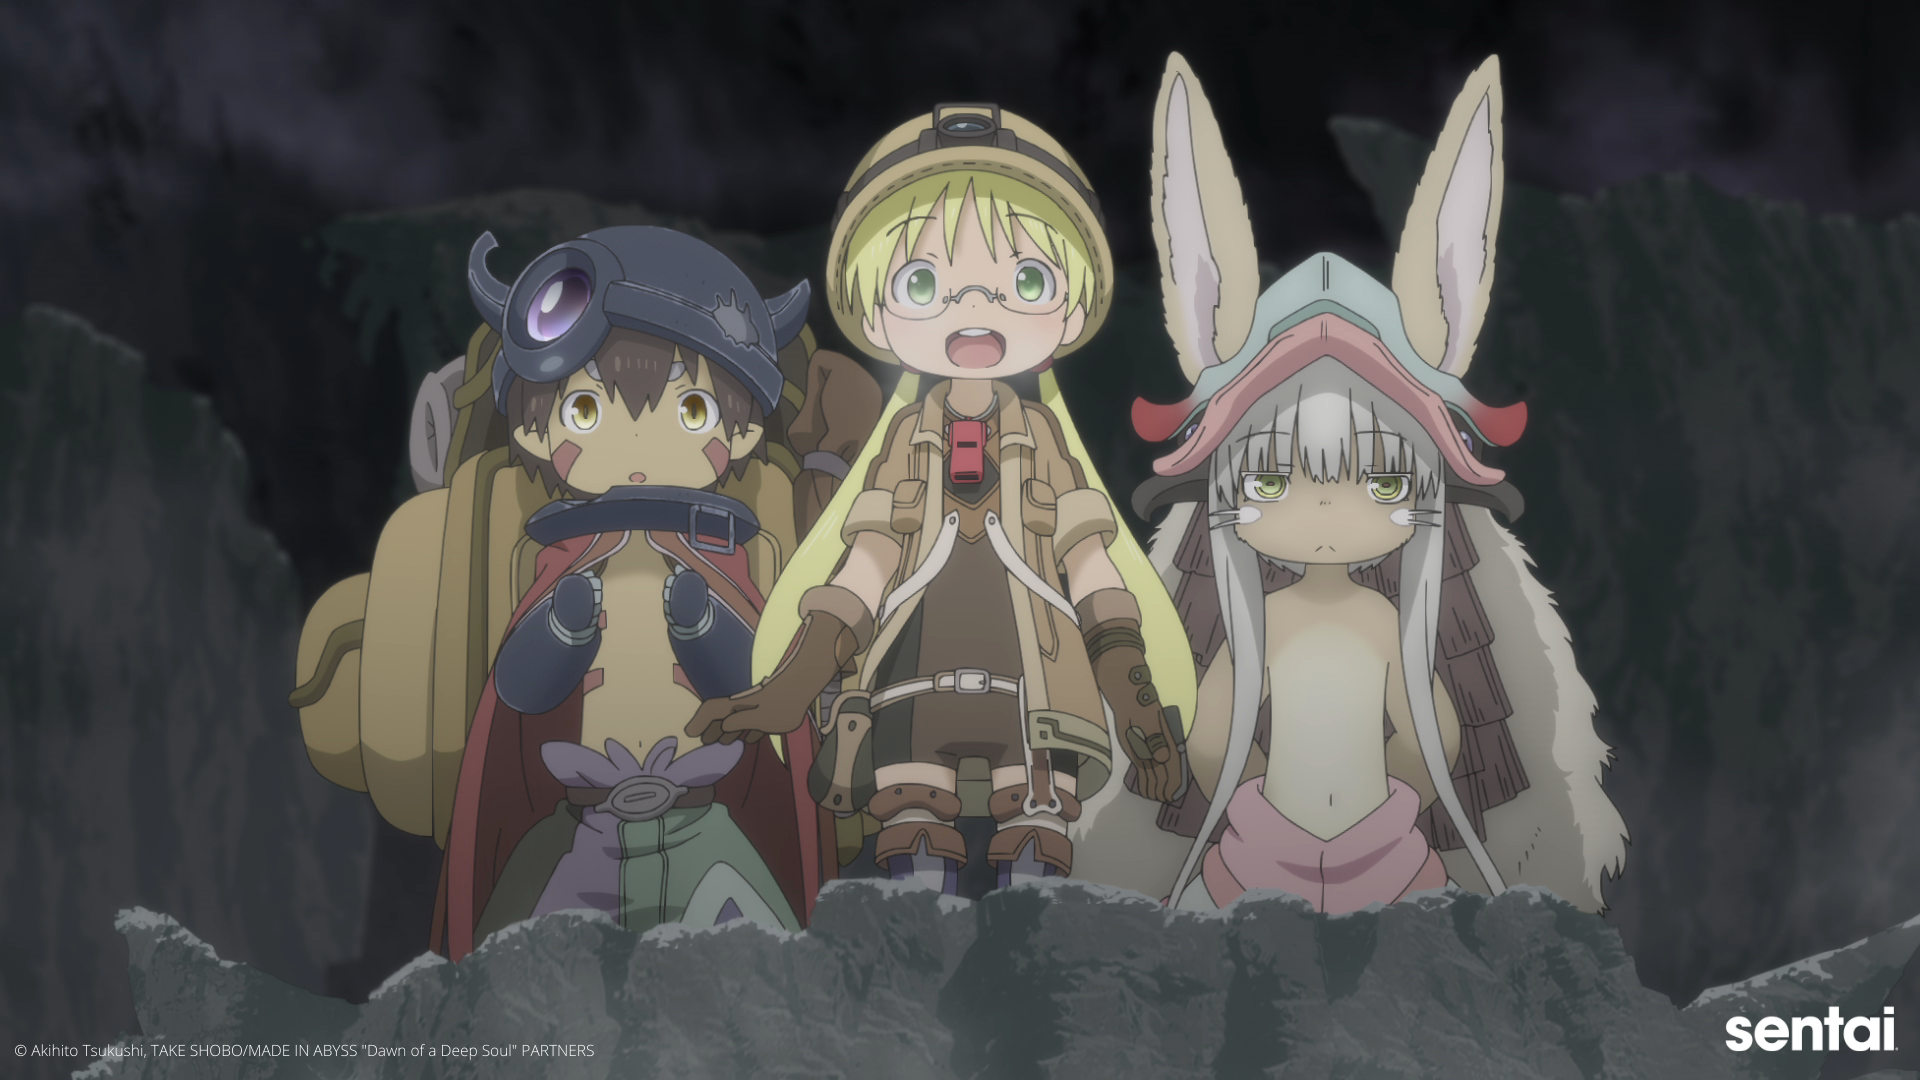 ANIME/FILM REVIEW, A Masterfully Deep Adventure In Third Made In Abyss  Film - B3 - The Boston Bastard Brigade